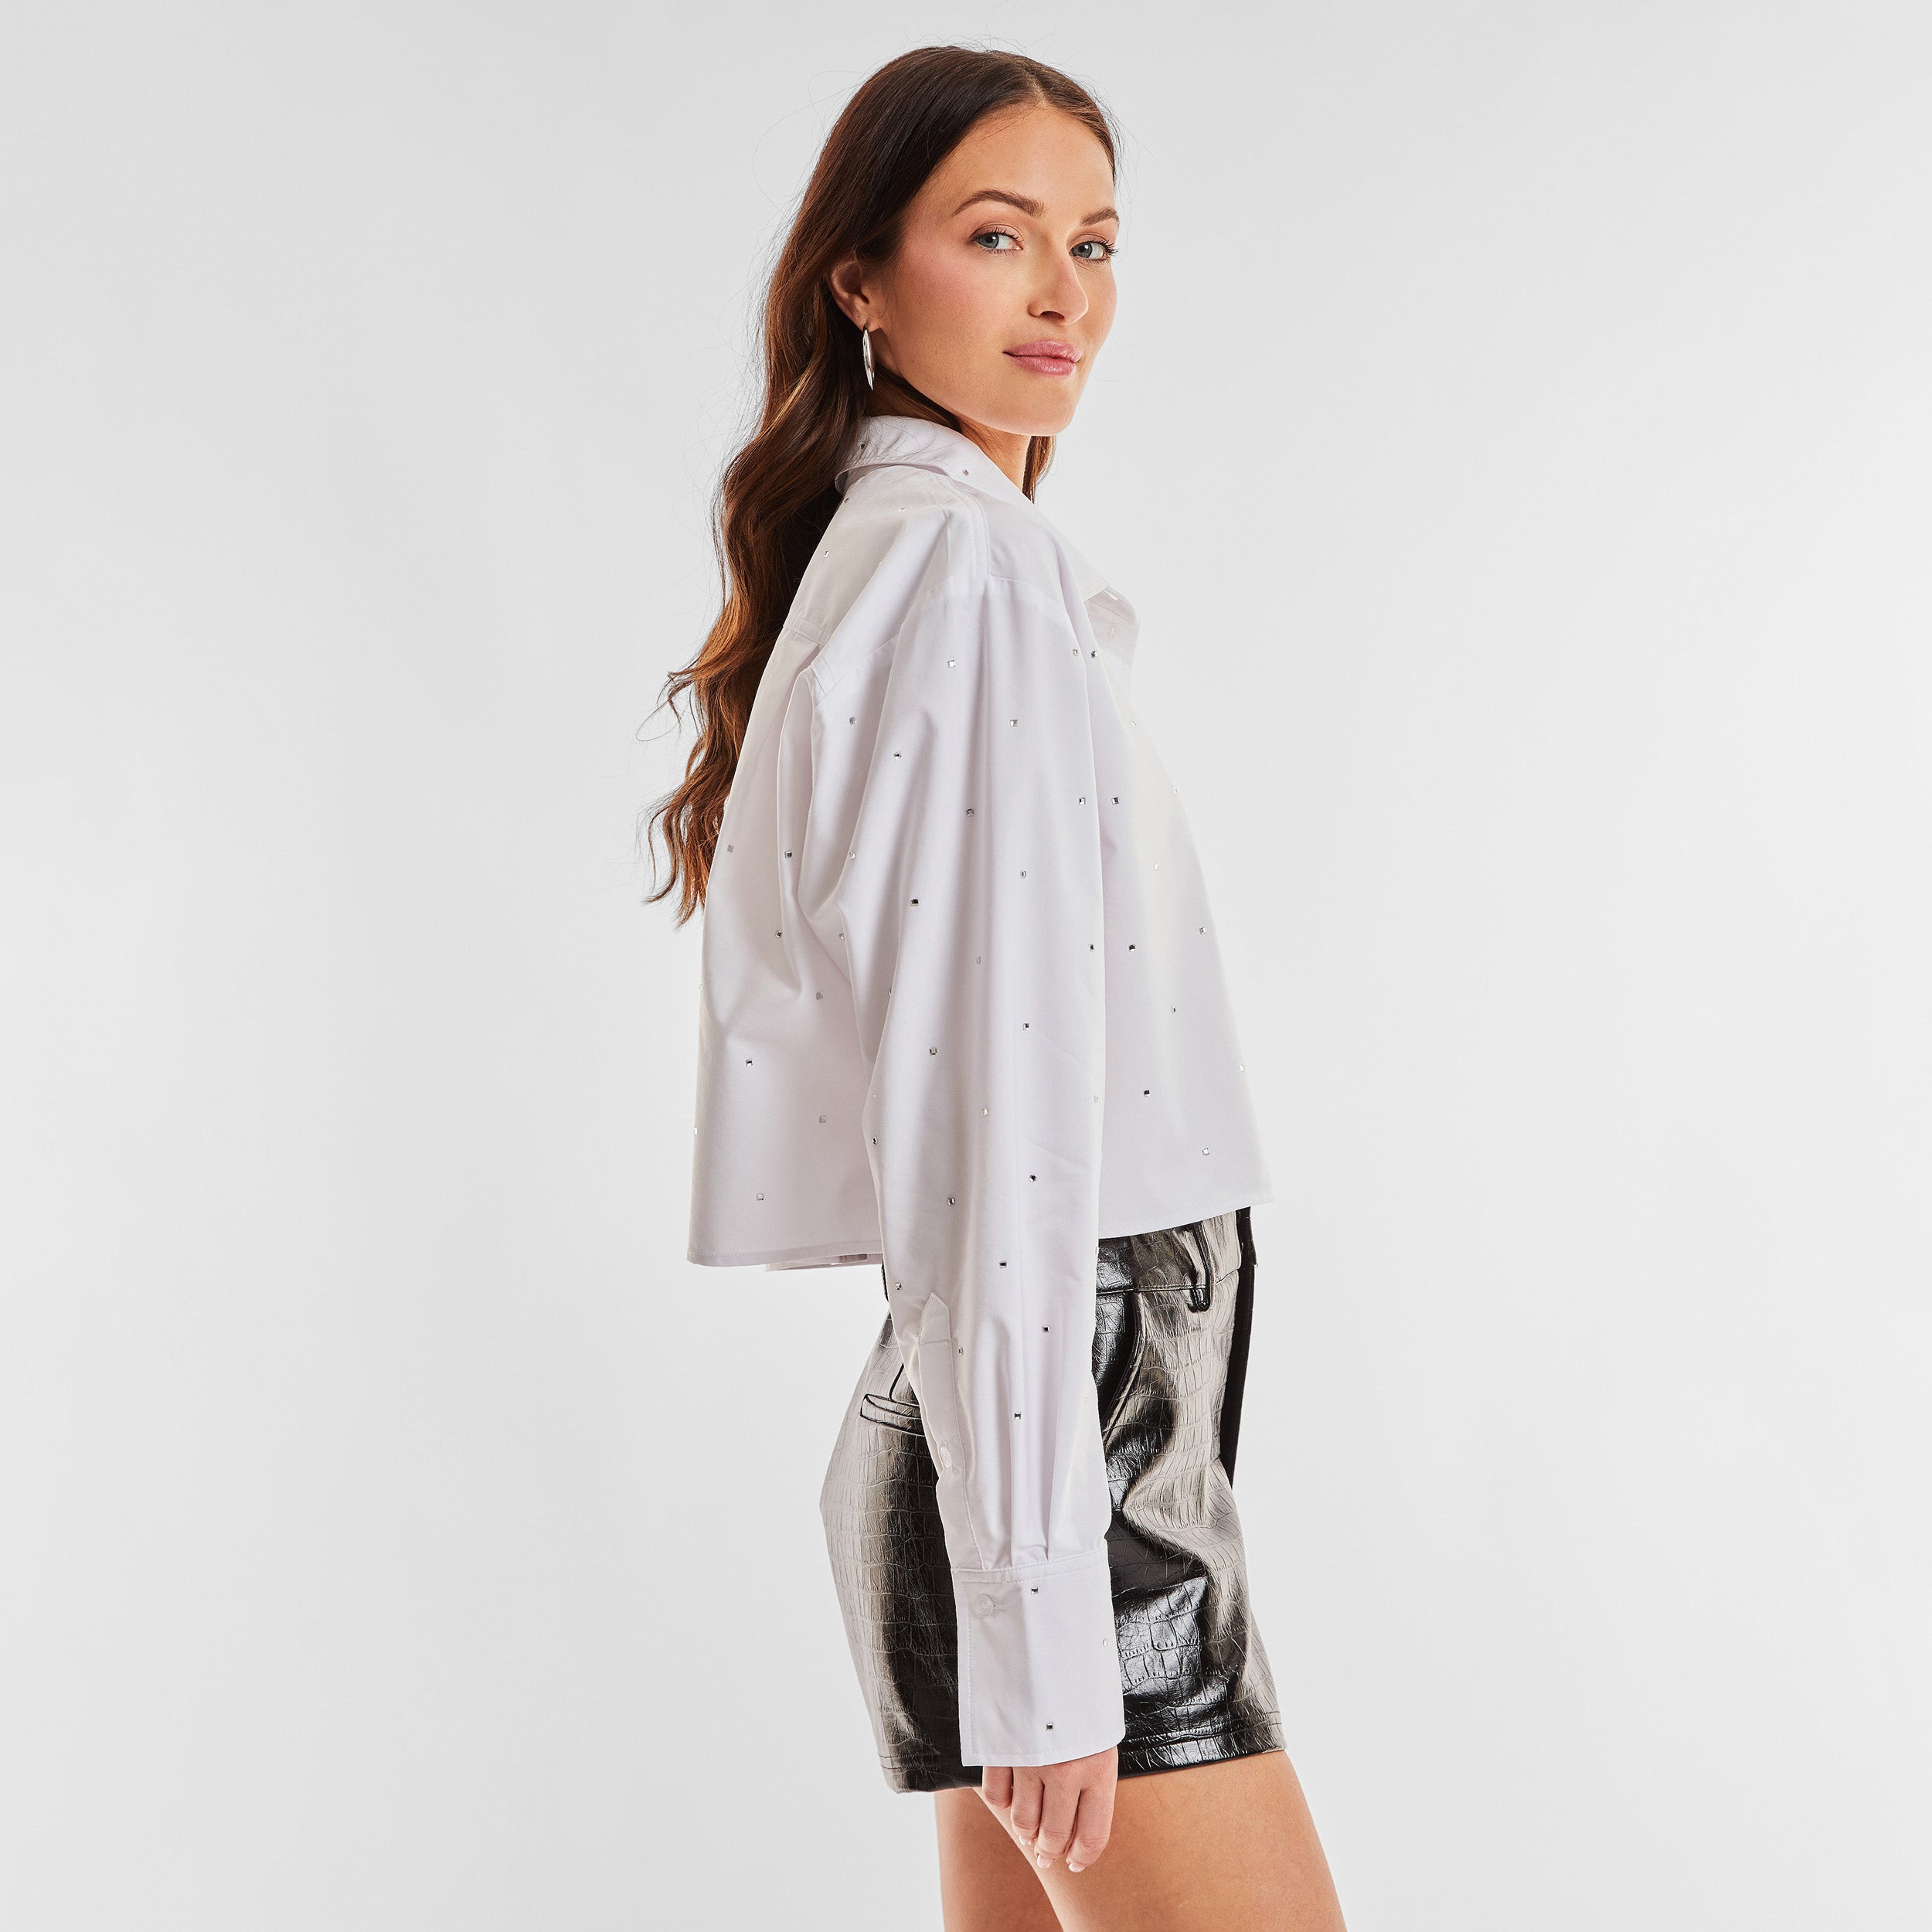 Side view of woman wearing a white cropped button down shirt with crystal embellishments and black croco pattern embossed faux leather short.